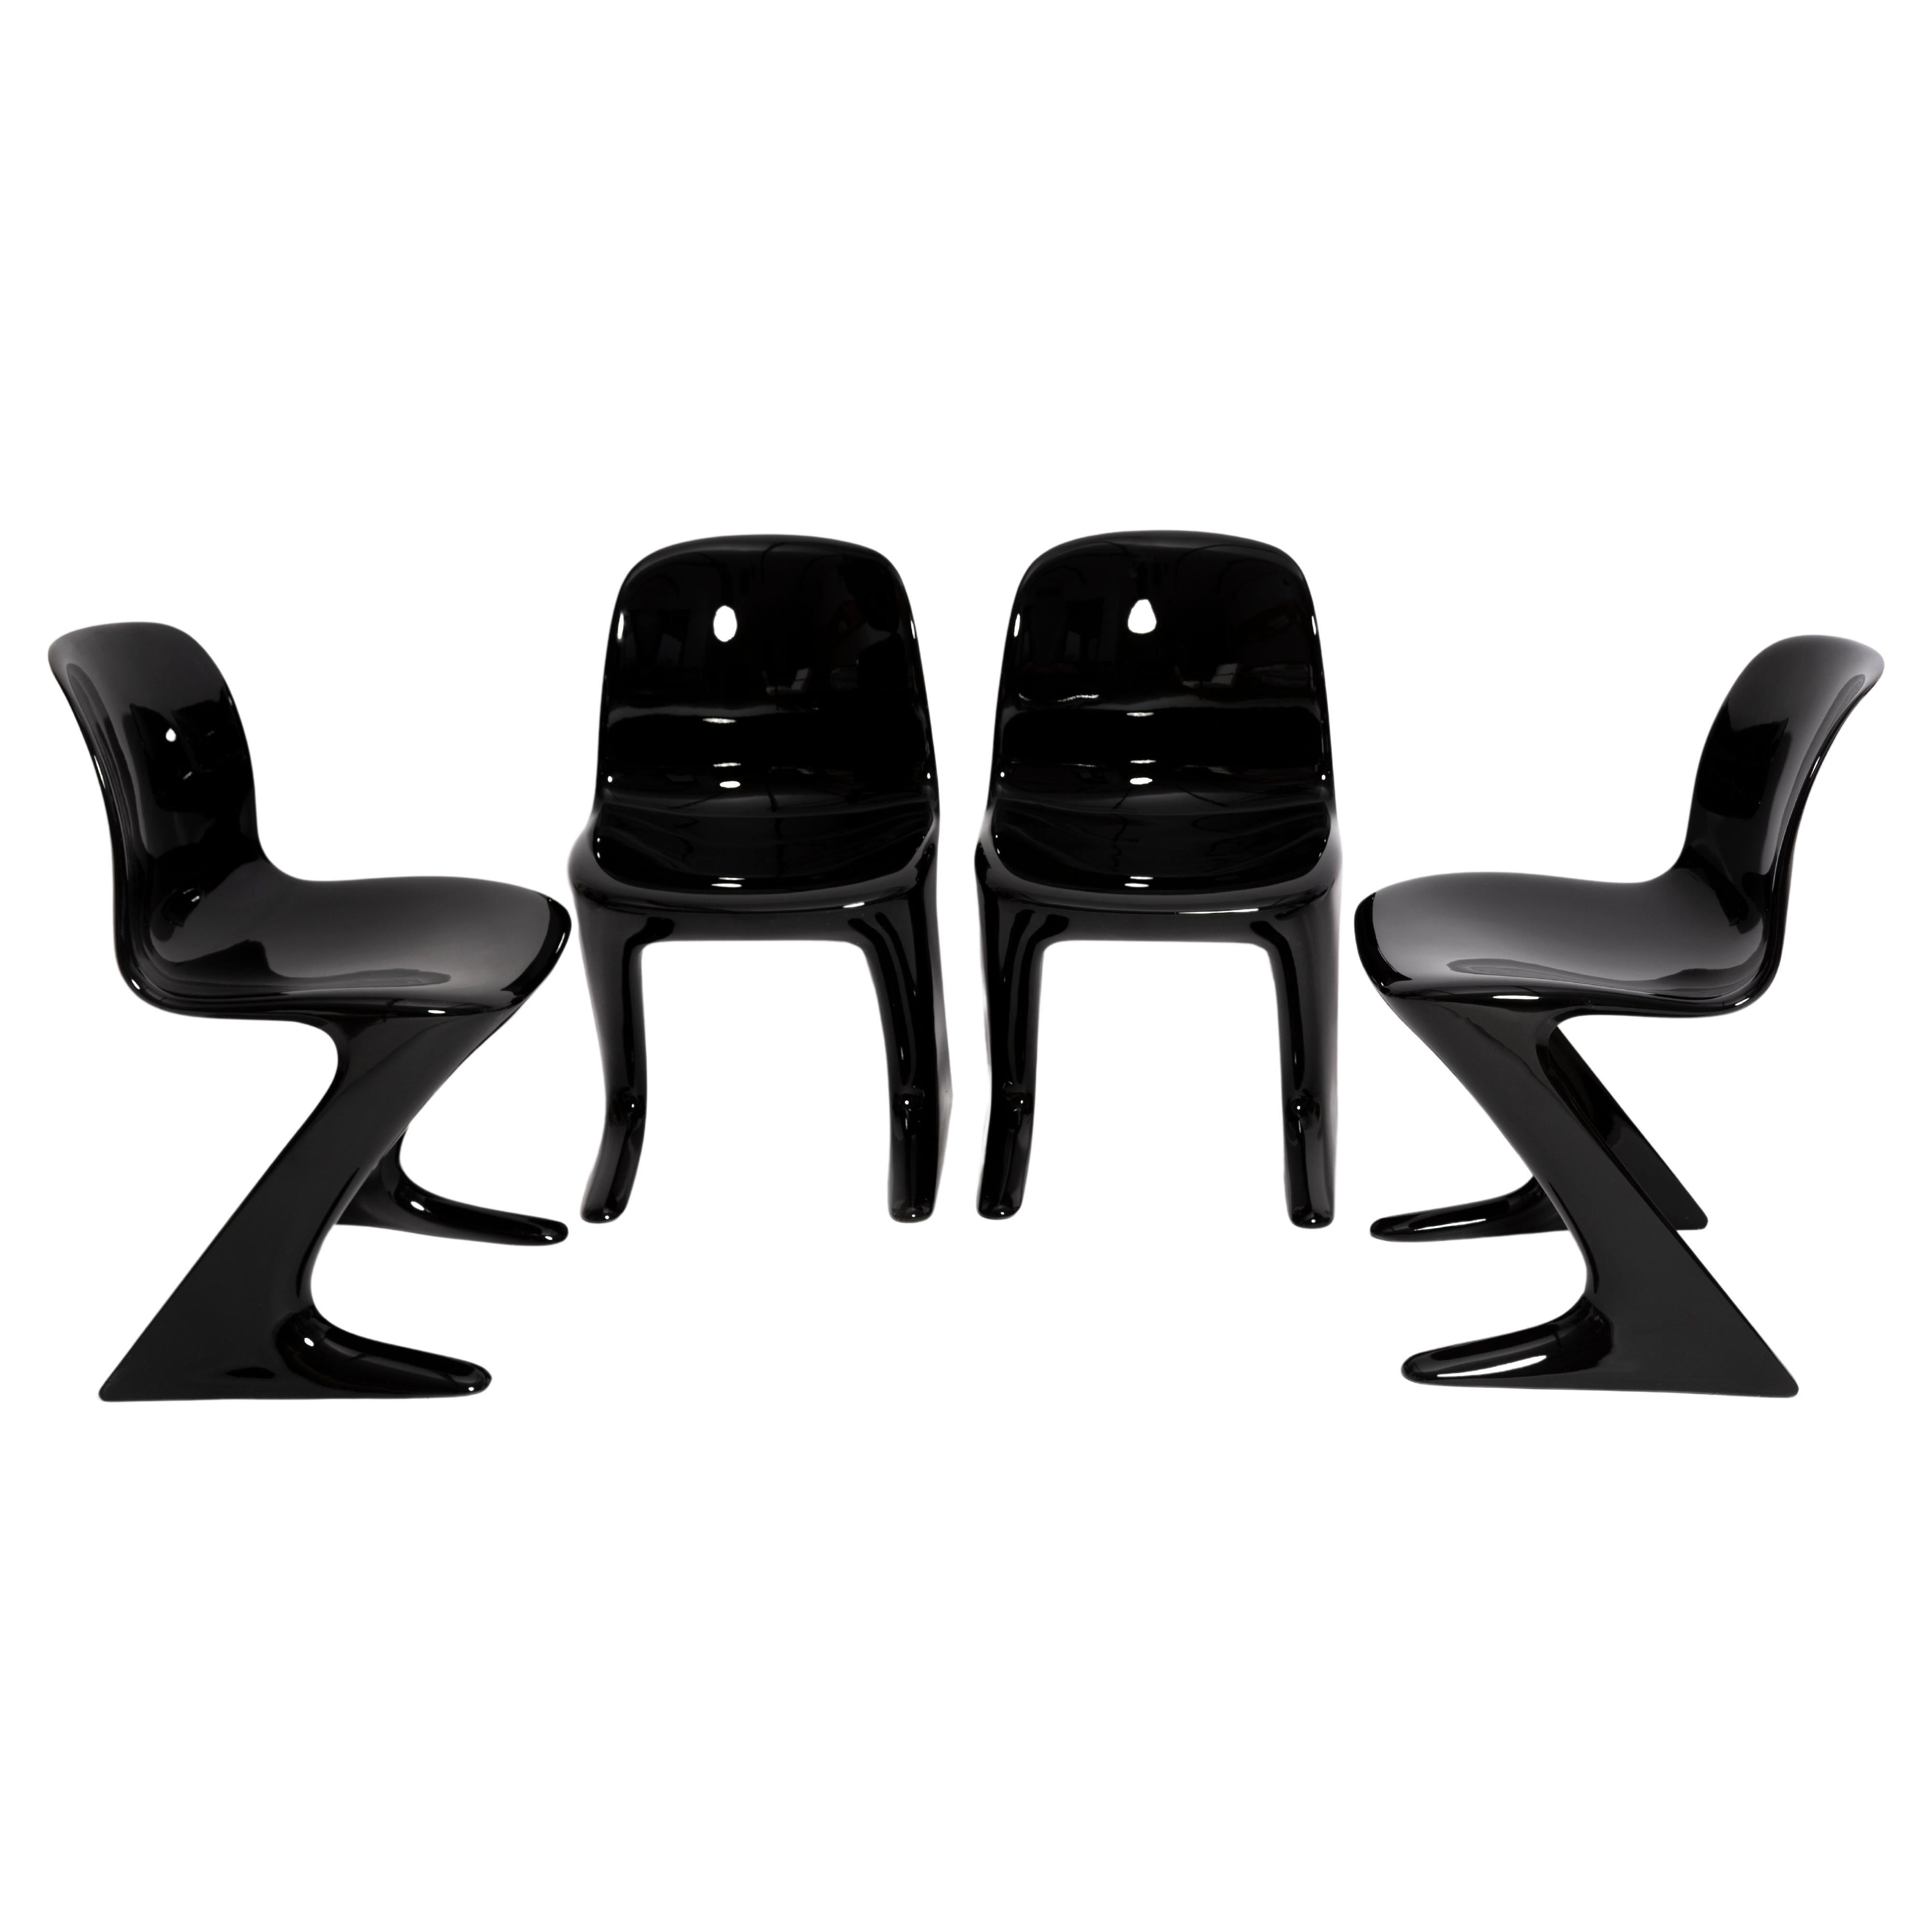 Four Mid Century Black Kangaroo Chairs Designed by Ernst Moeckl, Germany, 1960s